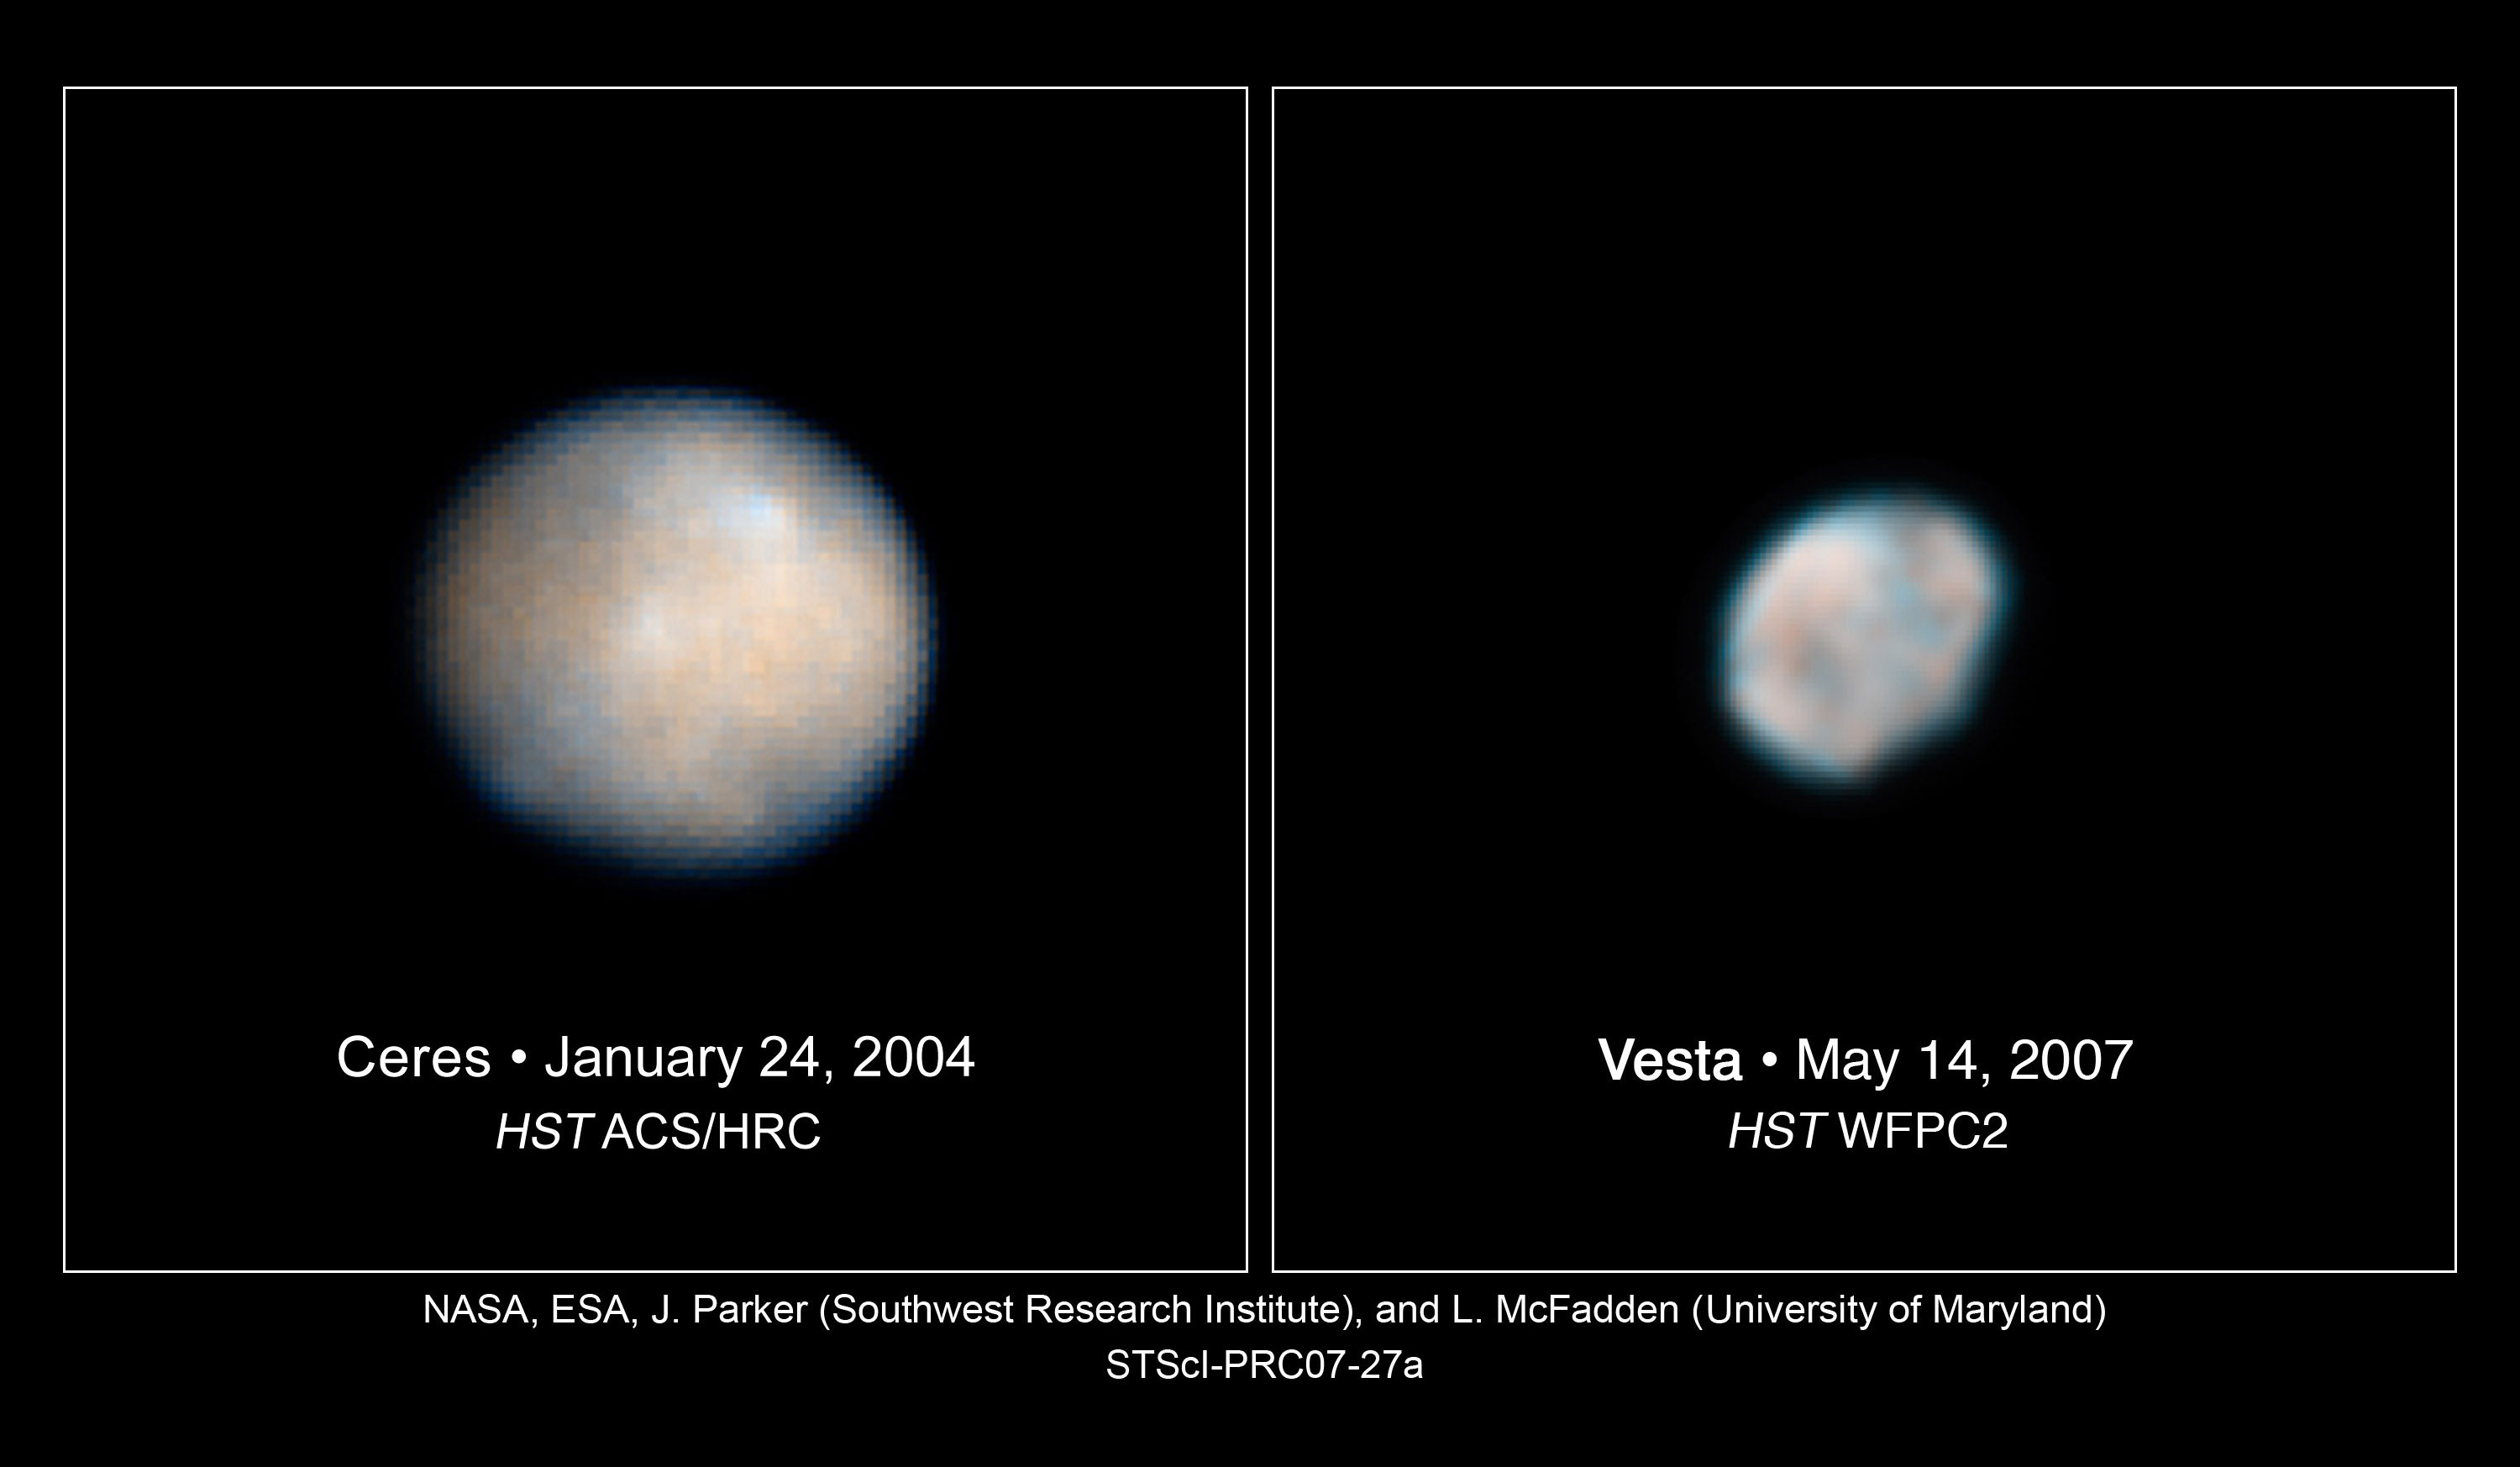 These Hubble Space Telescope images of Vesta and Ceres show two of the most massive asteroids in the asteroid belt, a region between Mars and Jupiter. The images were used to help astronomers plan for the Dawn spacecraft’s tour of these hefty asteroids before it even launched. 